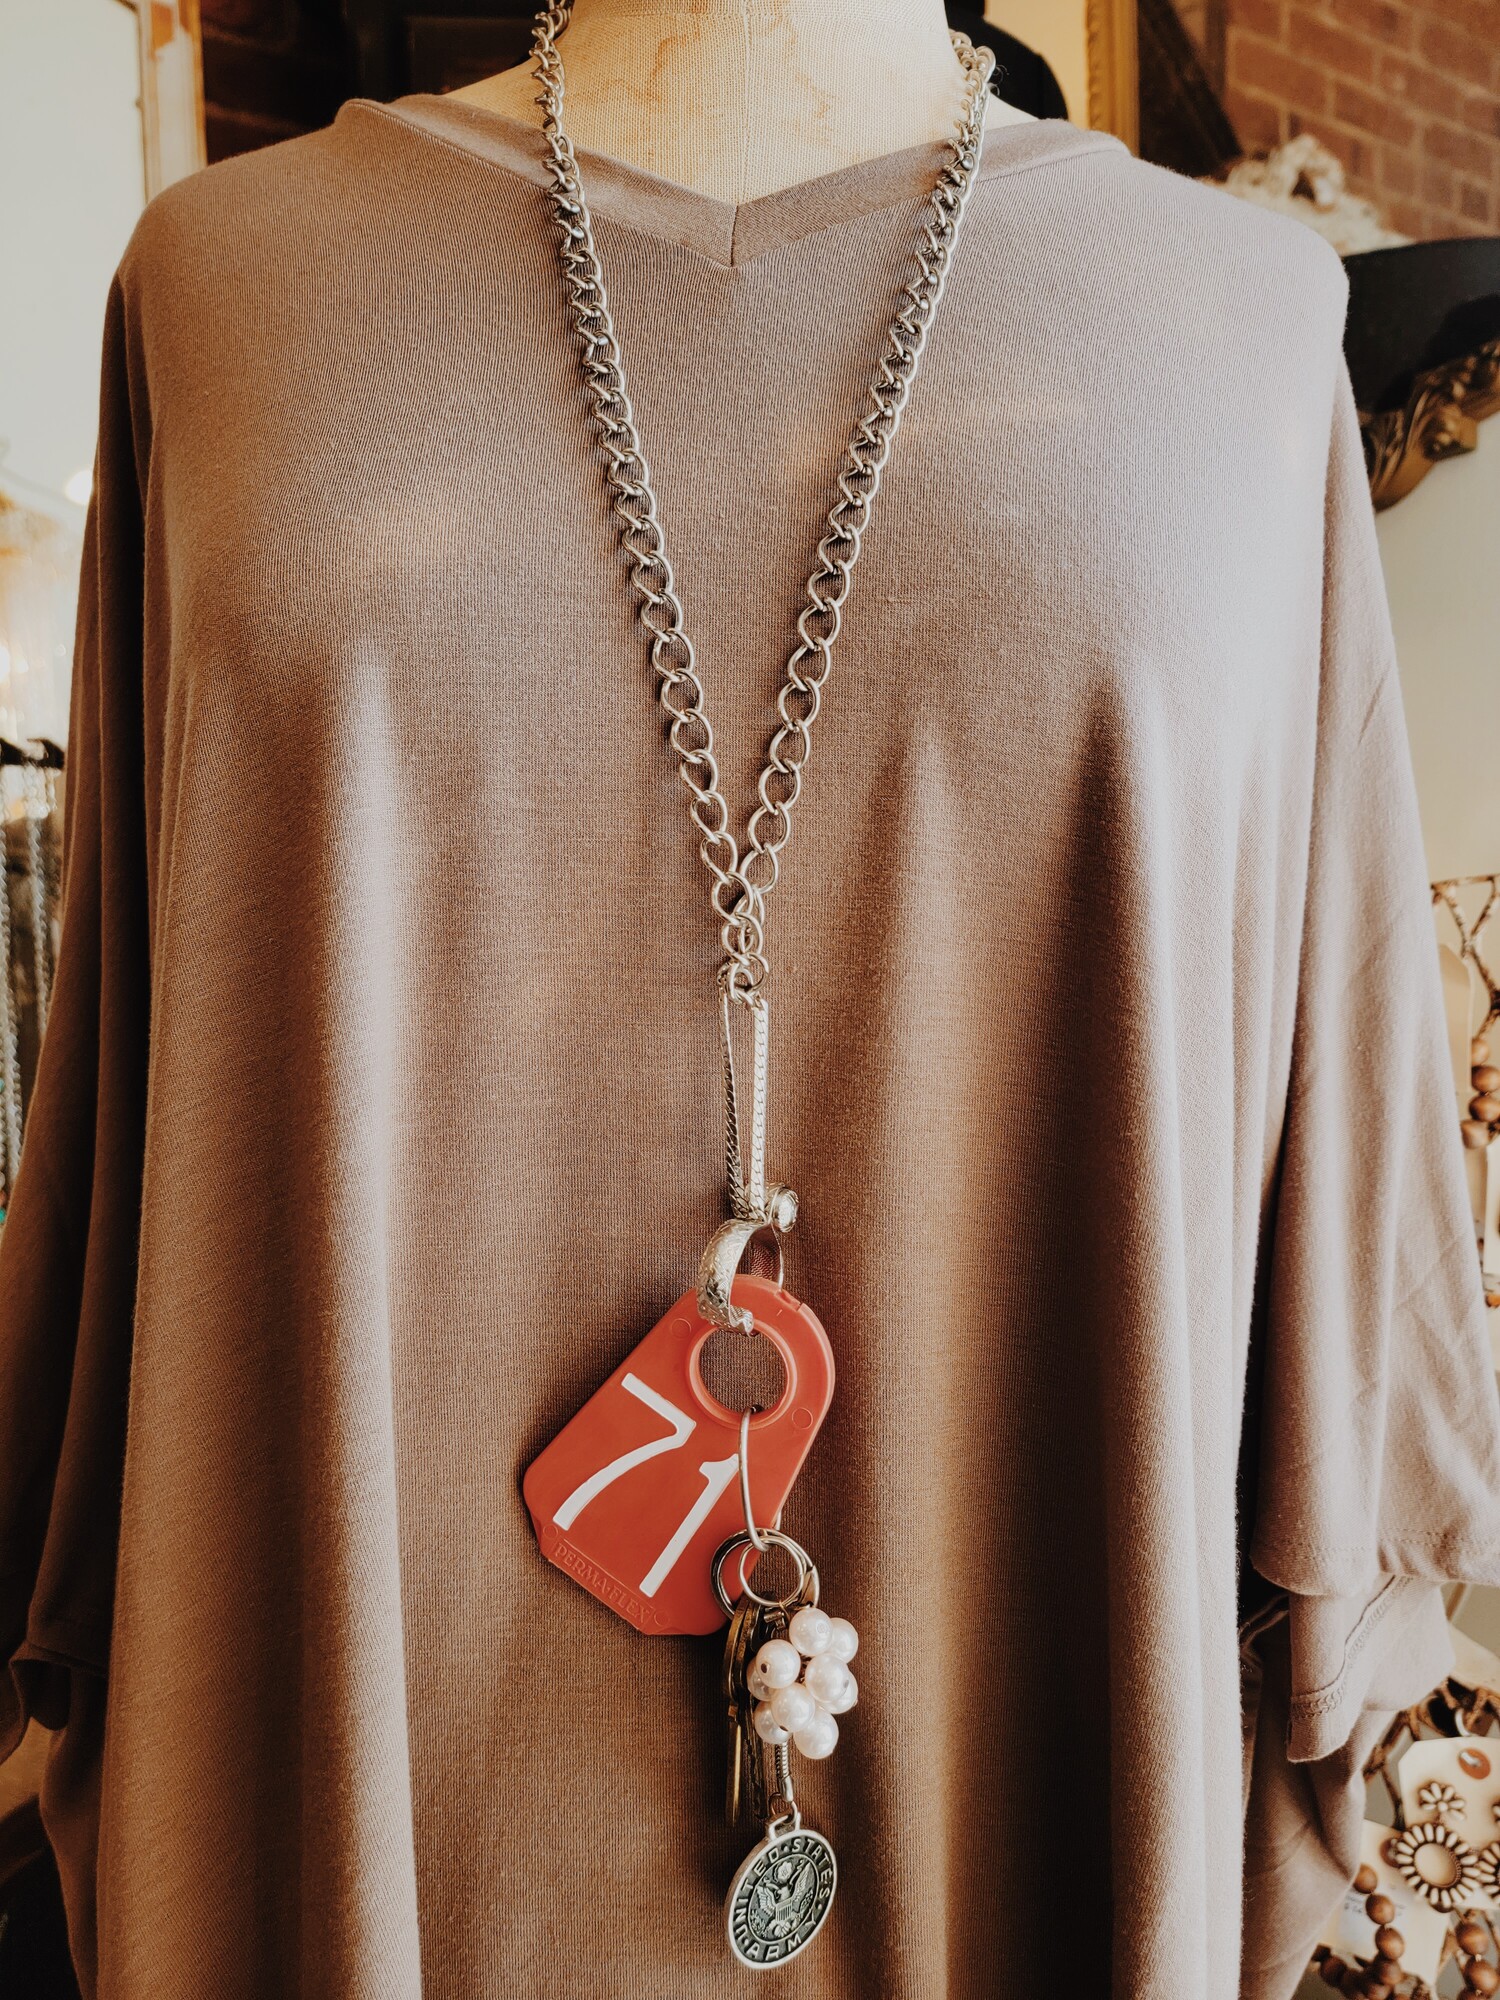 This one of a kind neccklace has a red cow tag with a 71 on it, three brass keys, a United States Army coin, and a chain of pearls. This all hangs on a 33 inch chain.